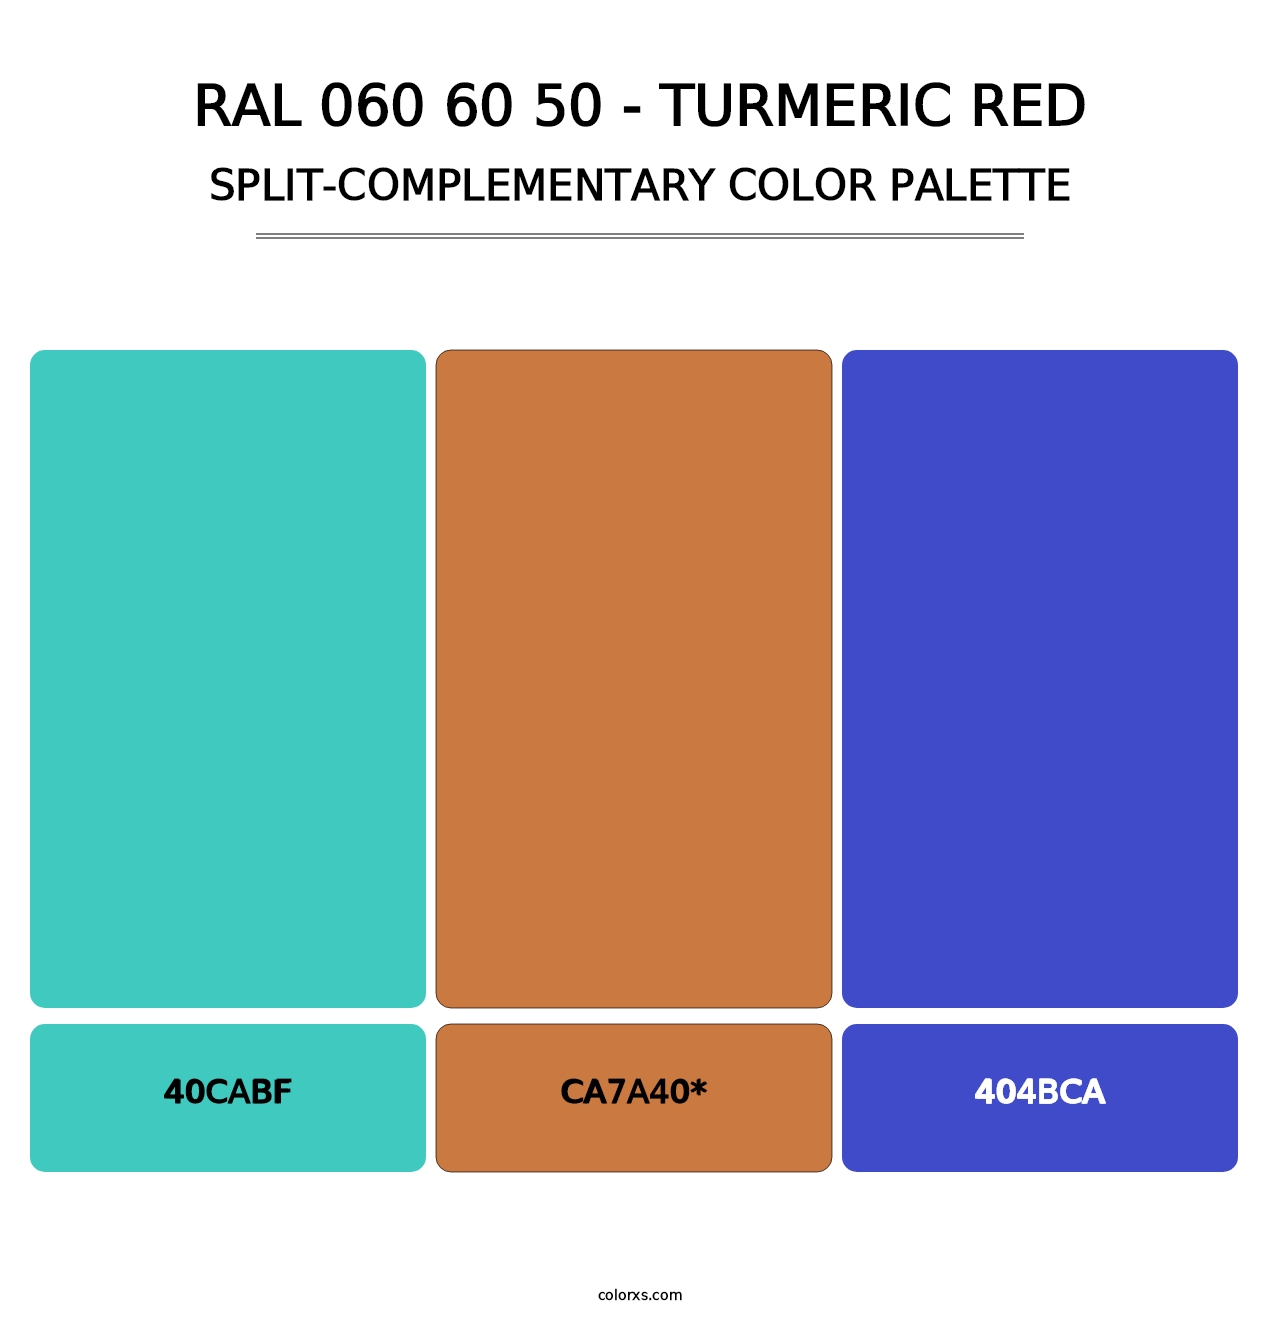 RAL 060 60 50 - Turmeric Red - Split-Complementary Color Palette